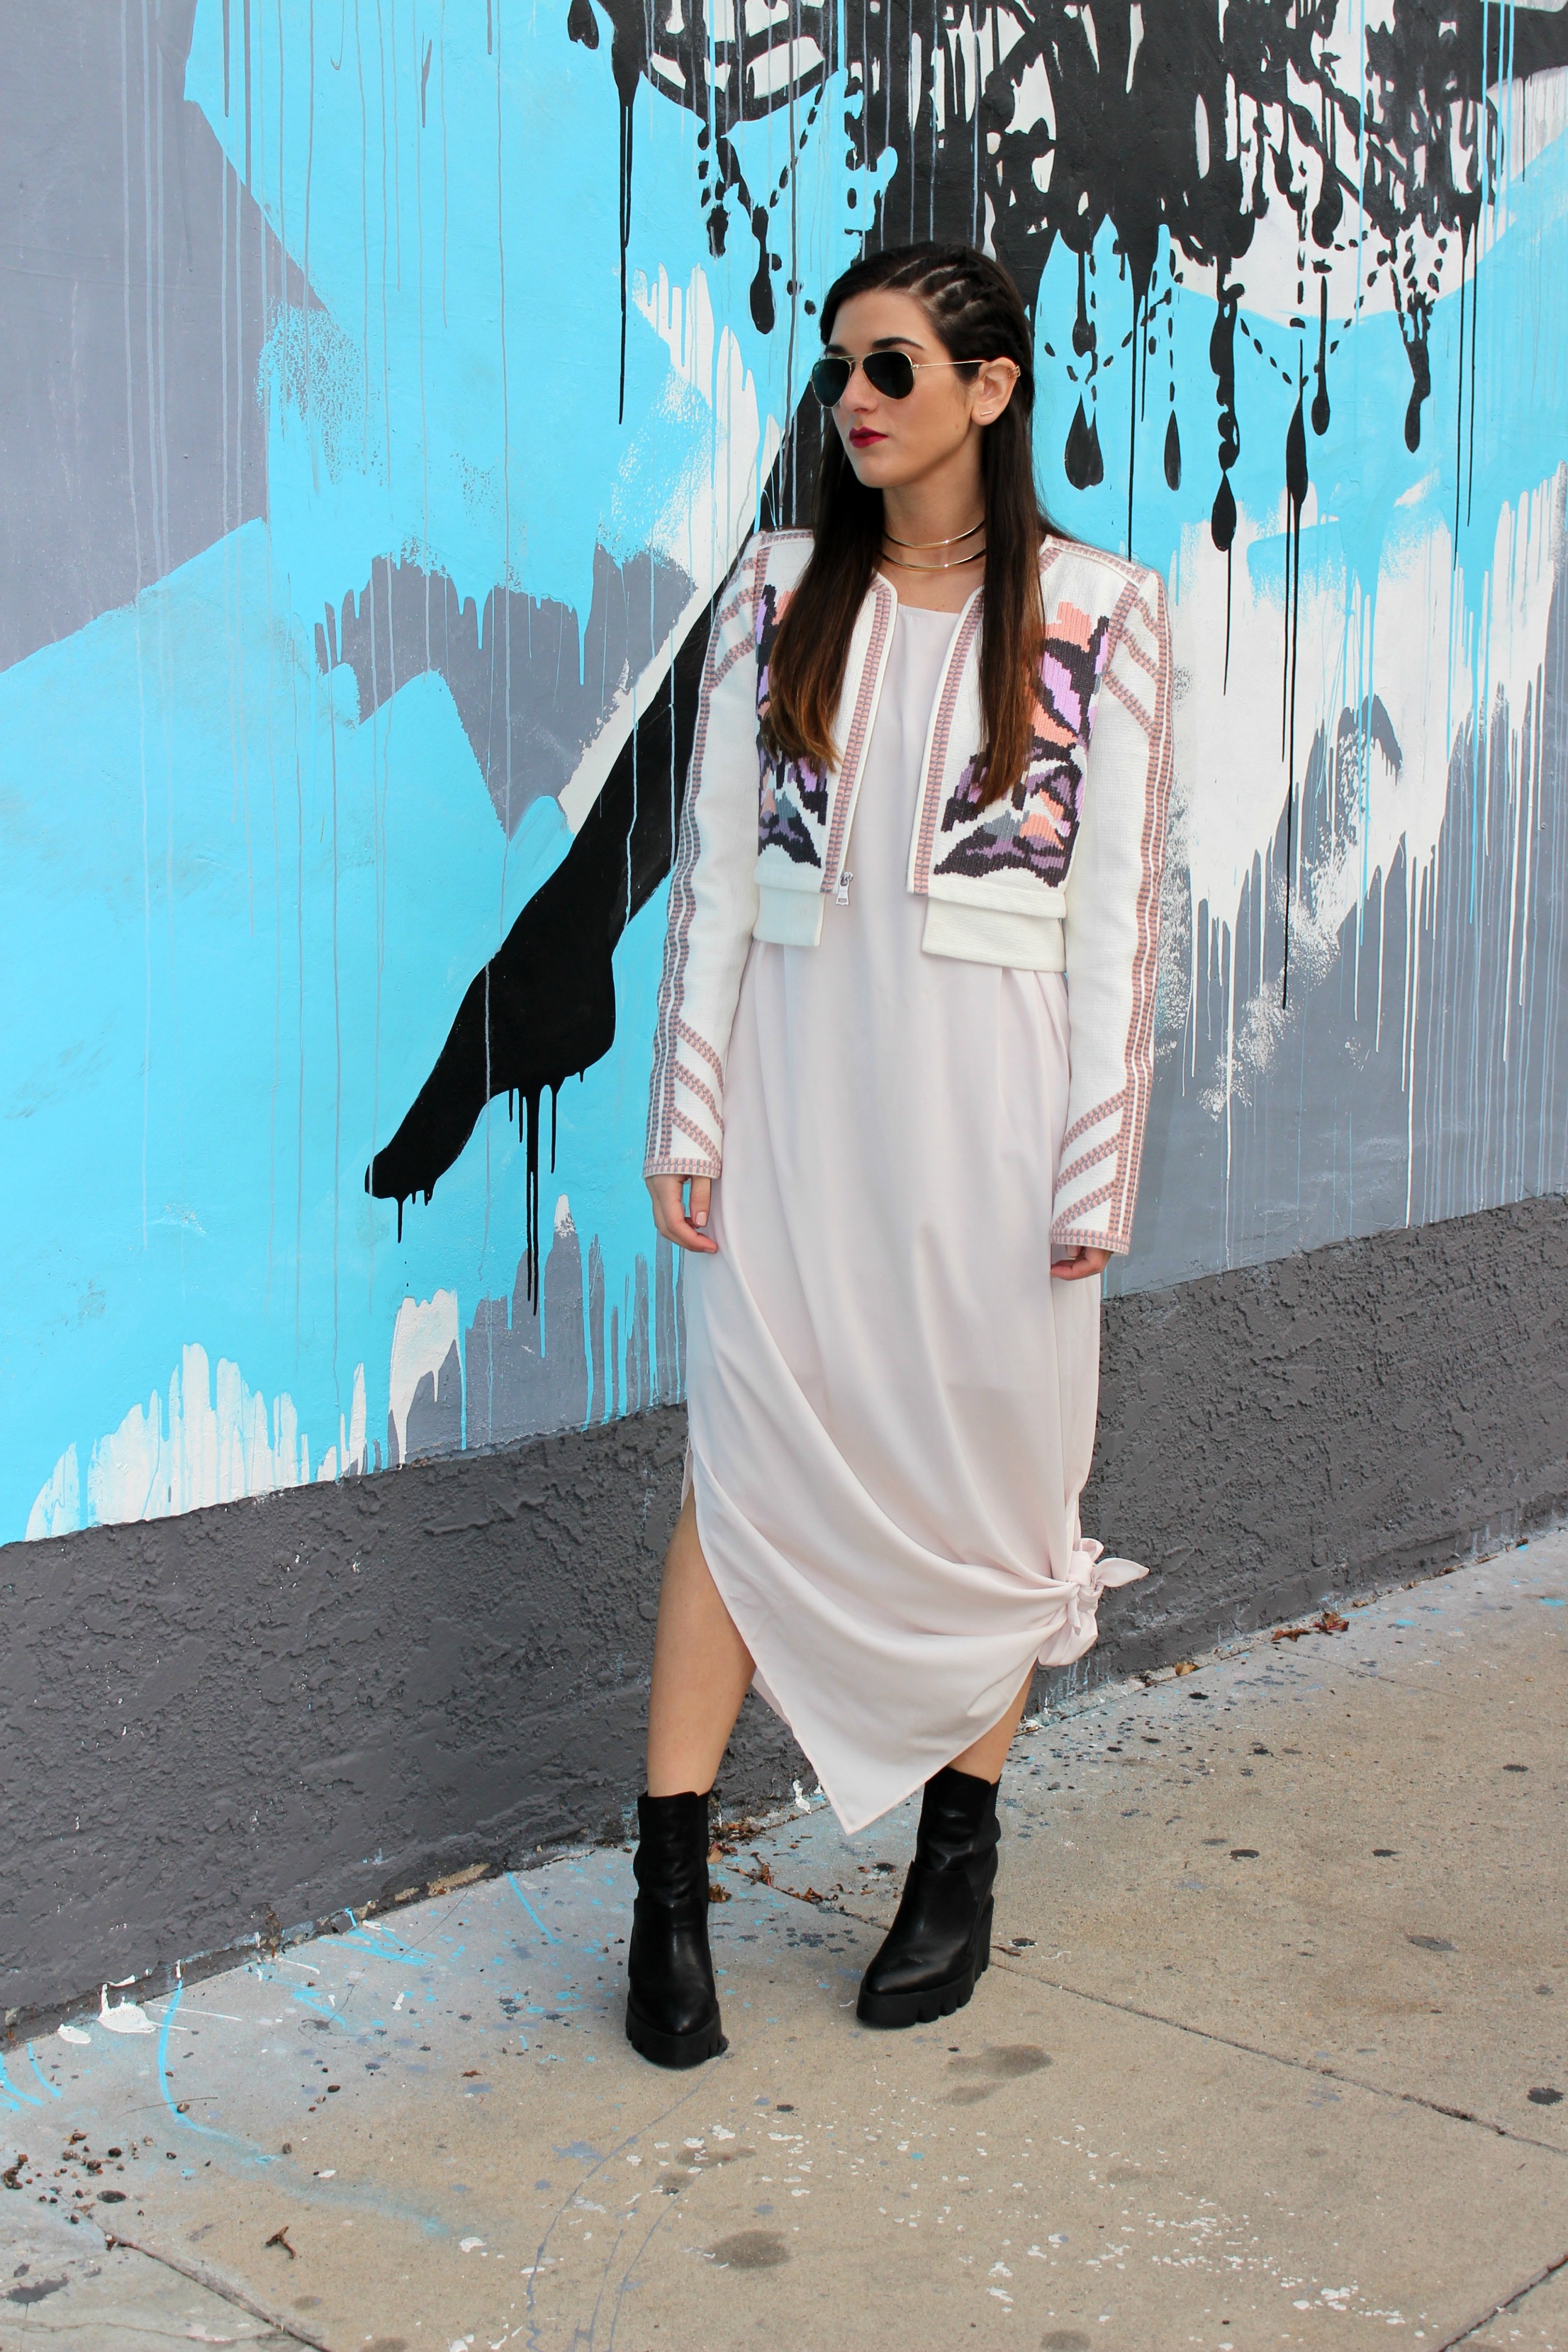 Knotted Maxi Dress Zehava Harel Louboutins & Love Fashion Blog Esther Santer NYC Street Style Blogger Blush Pink Modest Outfit OOTD BCBG Jacket Ash Booties Gold Collar Necklace RayBan Aviator Sunglasses Hair Inspo  Model Accessories Wear Model Women.jpg